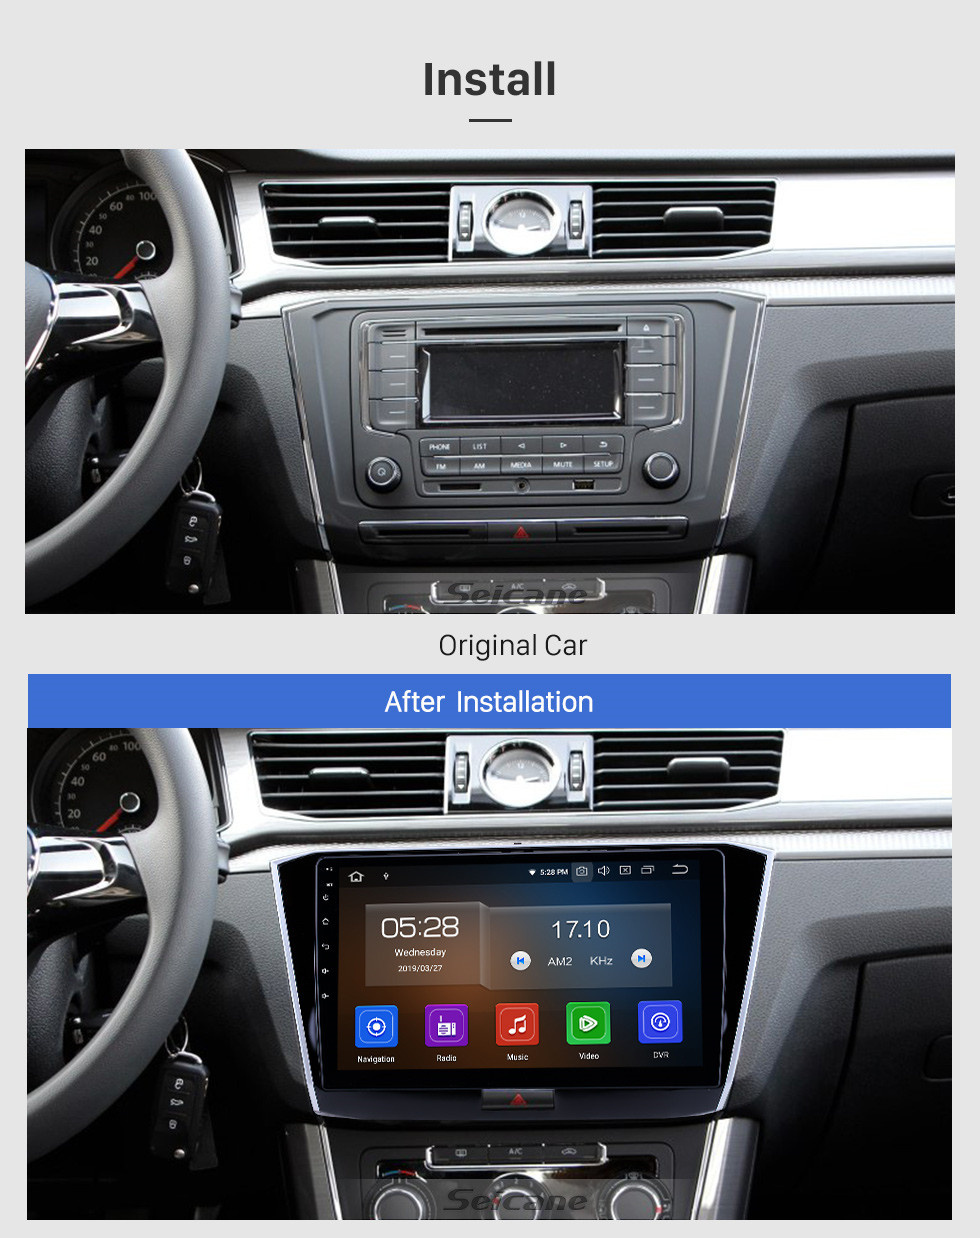 Seicane 10.1 inch Android 11.0 Radio for 2016-2018 VW Volkswagen Passat Bluetooth HD Touchscreen GPS Navigation Carplay USB support OBD2 Backup camera